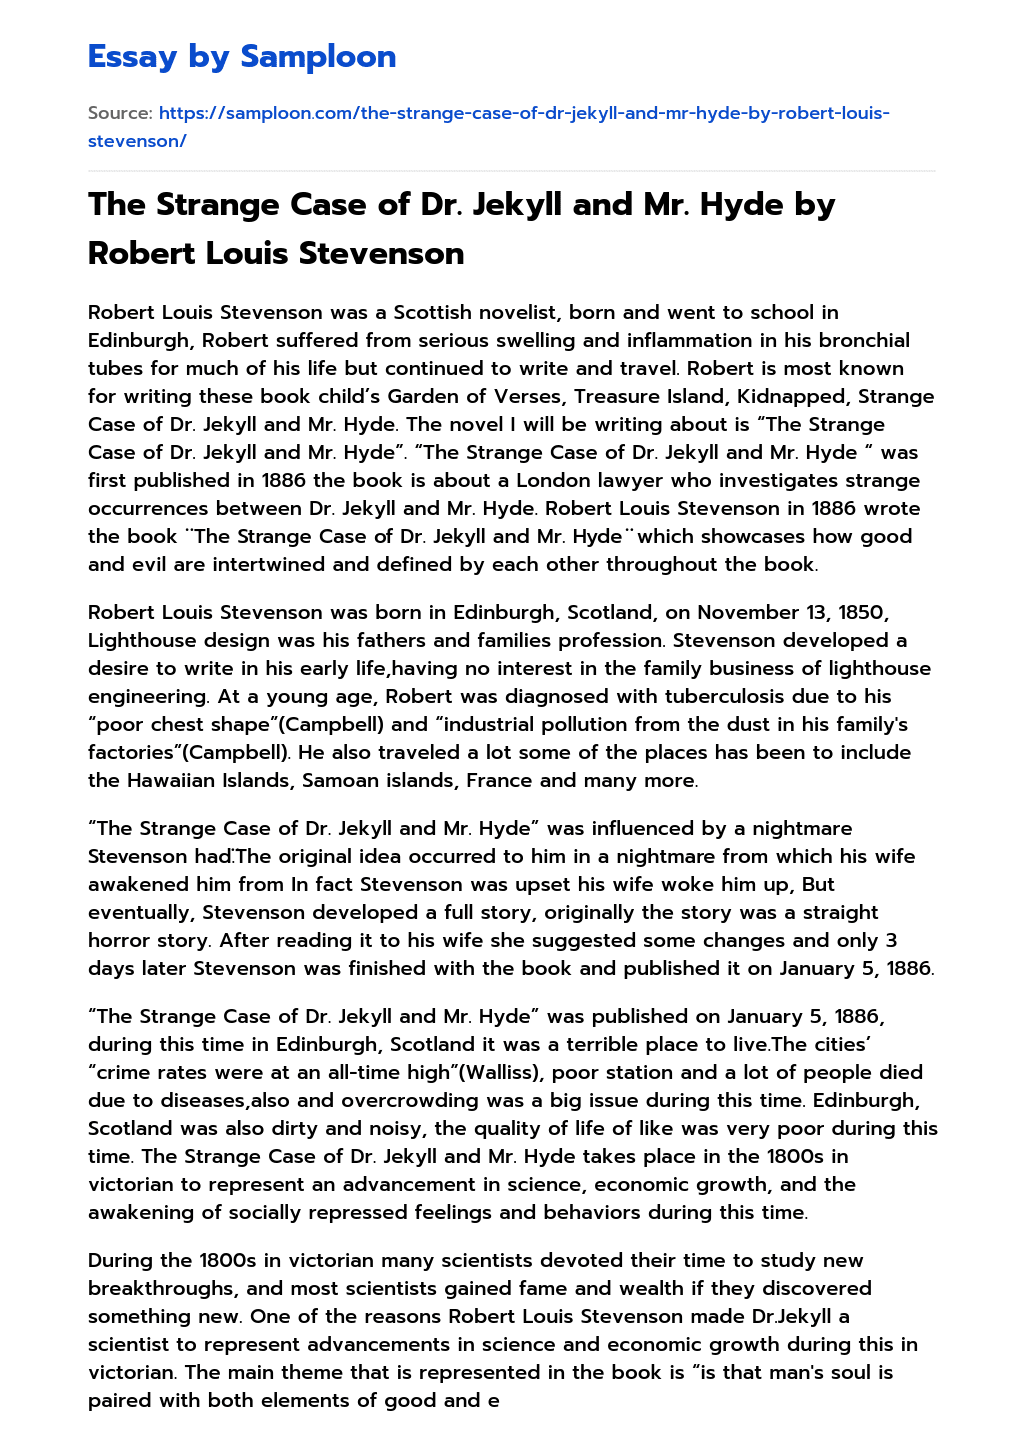 The Strange Case of Dr. Jekyll and Mr. Hyde by Robert Louis Stevenson Reflective Essay essay